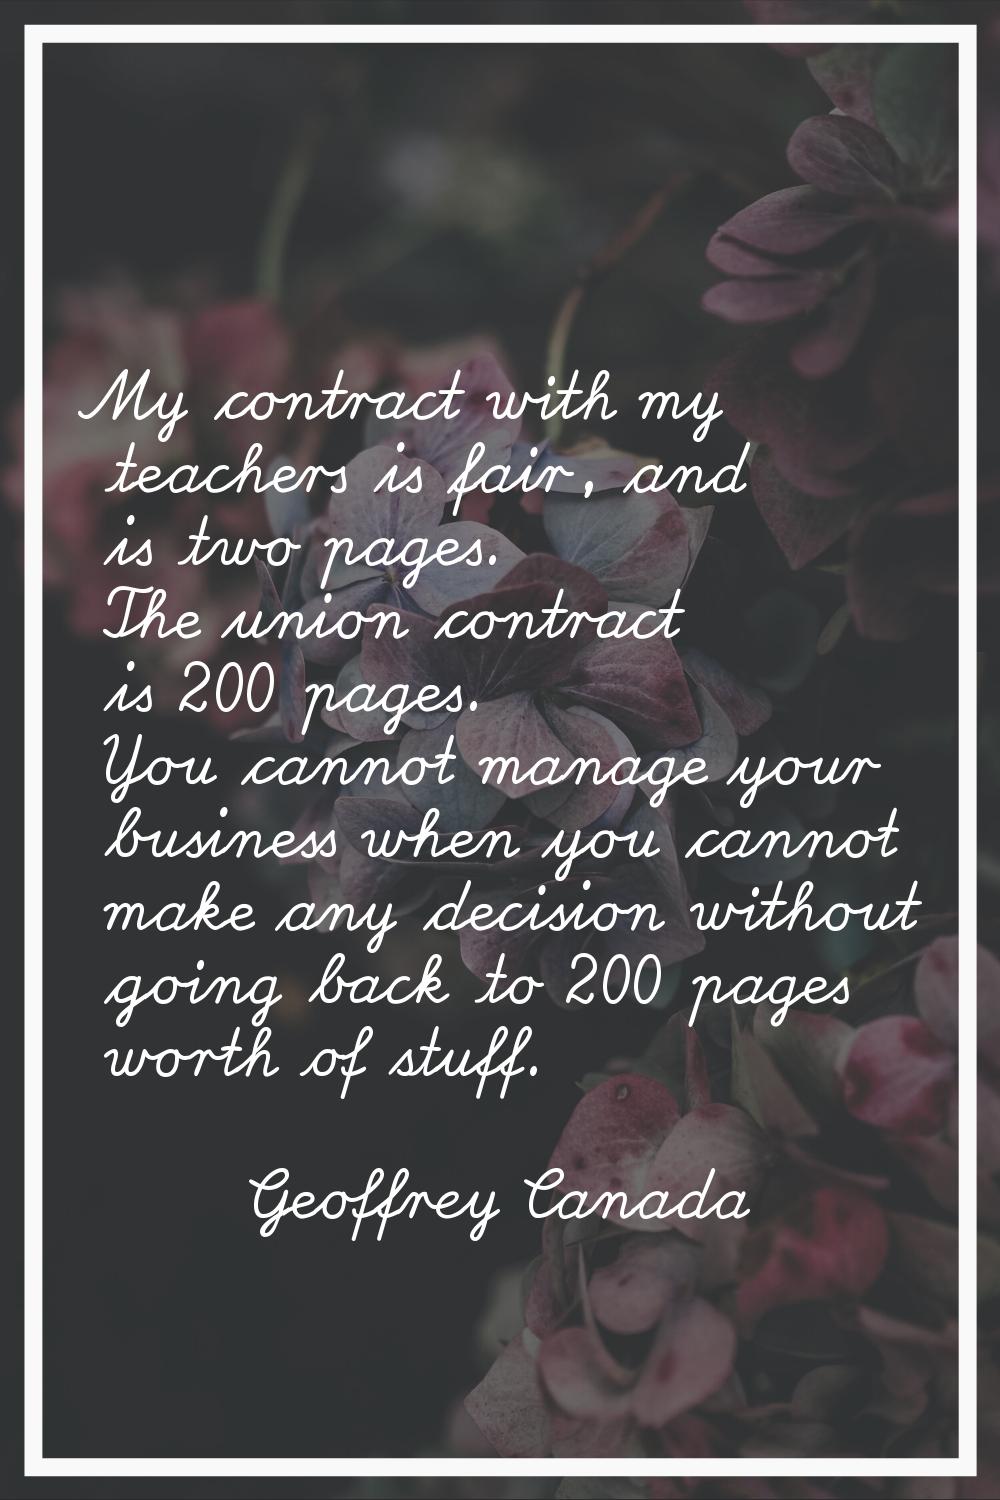 My contract with my teachers is fair, and is two pages. The union contract is 200 pages. You cannot